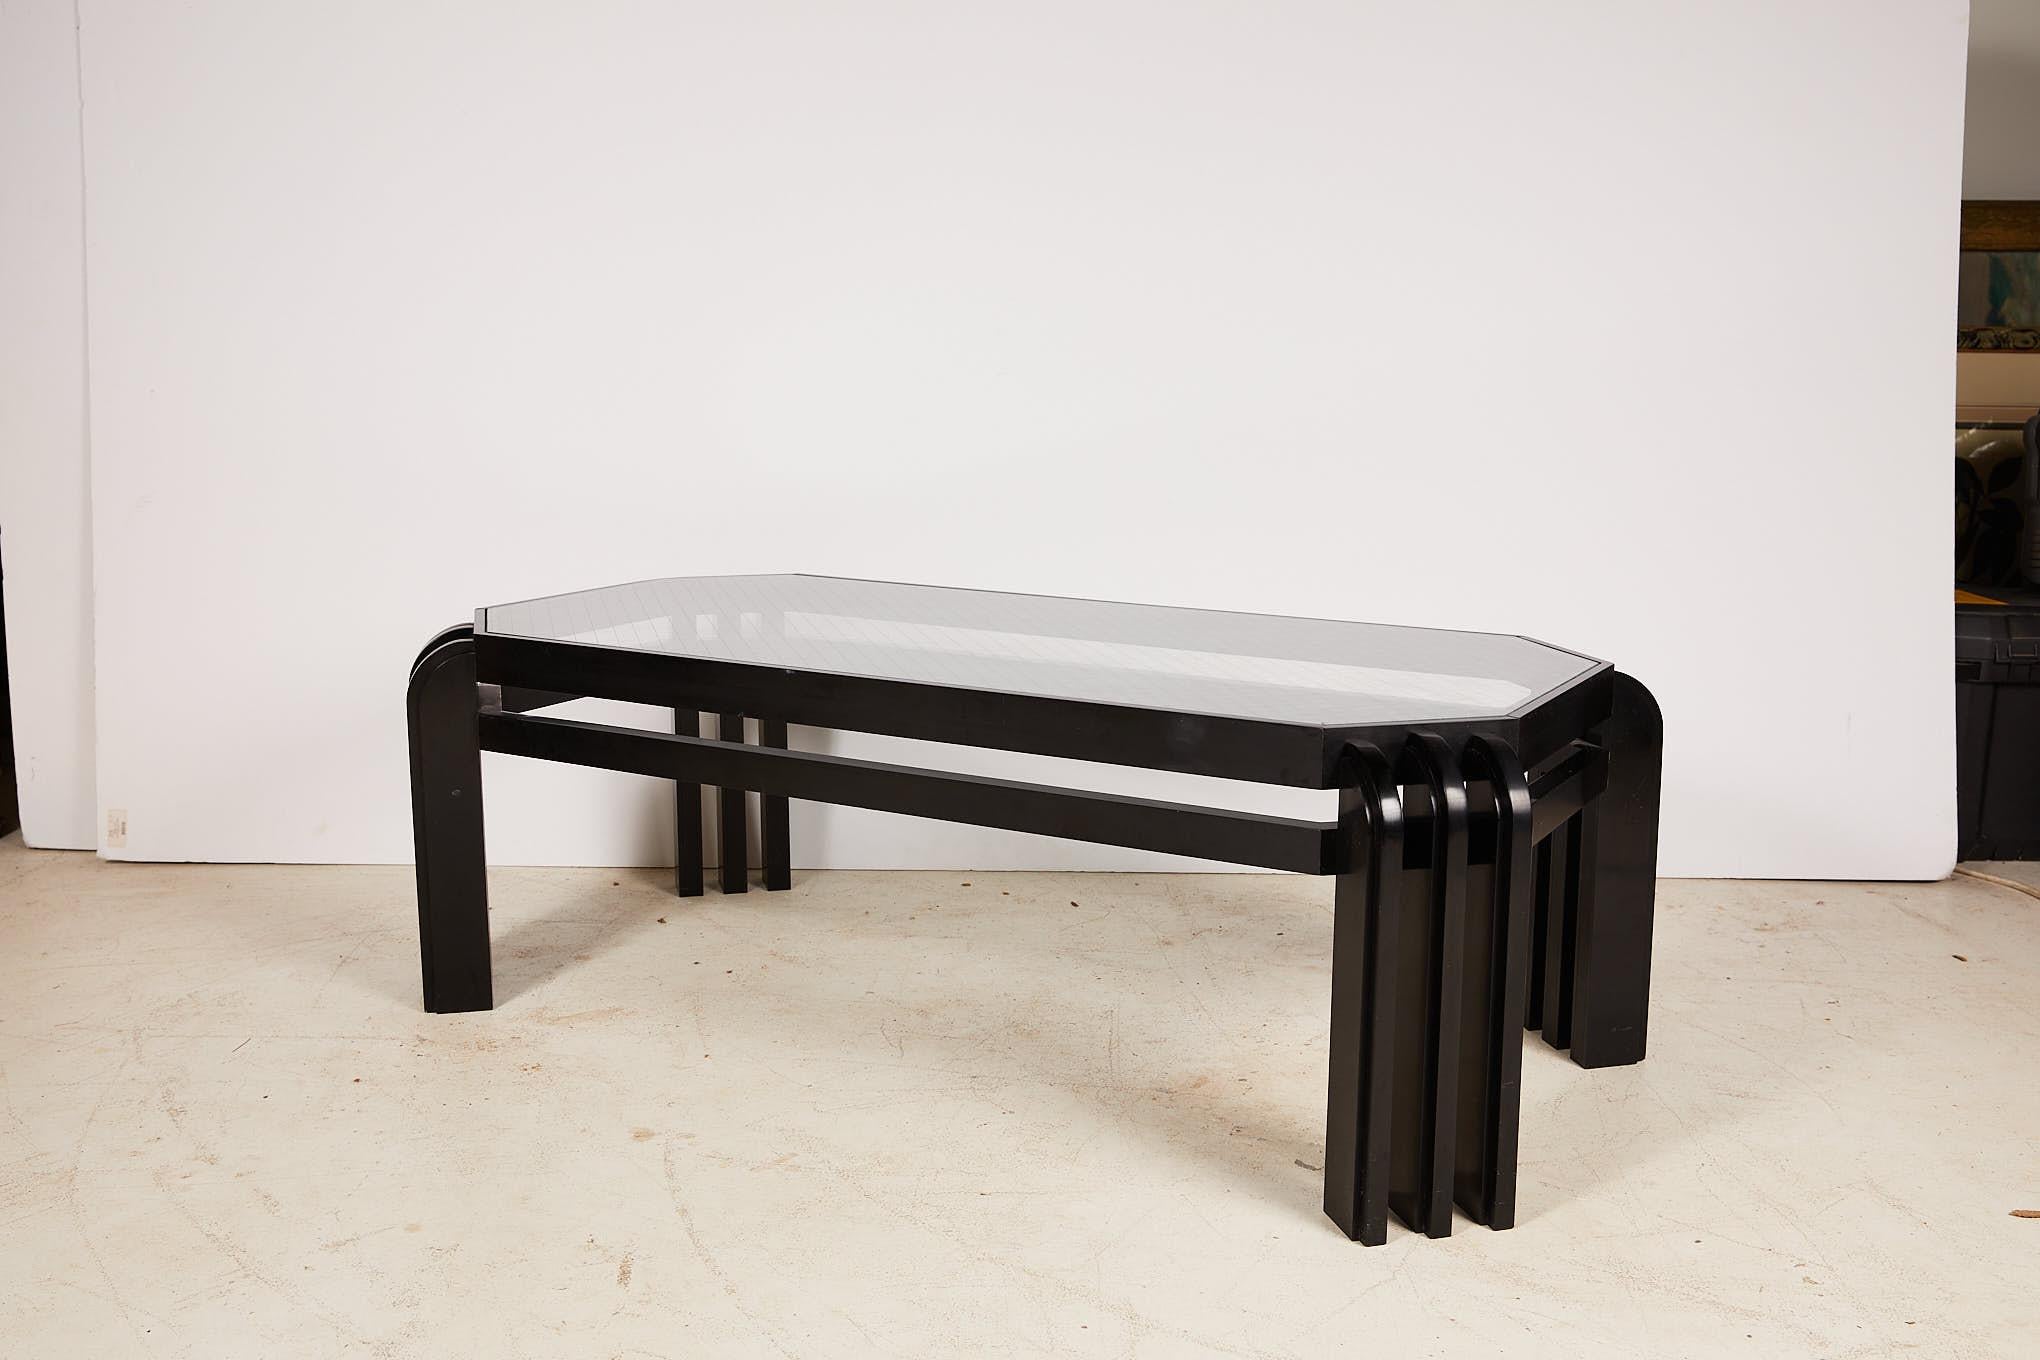 Sleek 20th century rectangular cocktail table in a black lacquer finish with tapered corners and an inset wired glass top having lattice pattern.